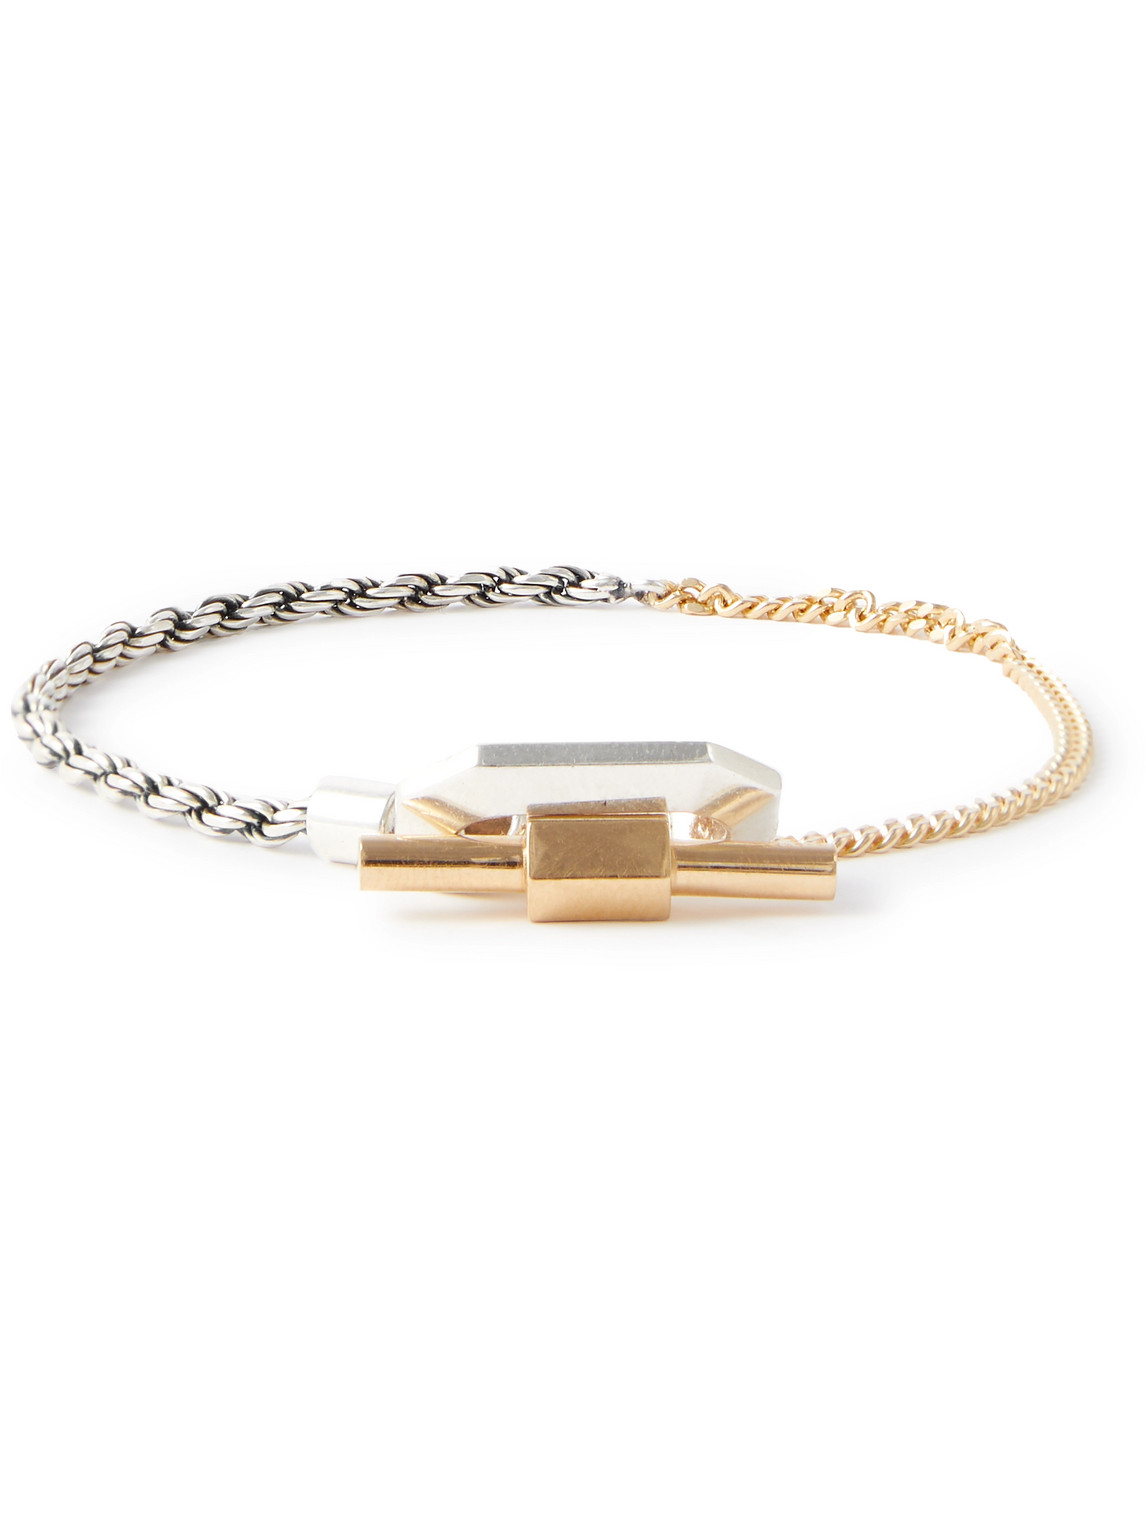 Bottega Veneta Gold-plated And Sterling Silver Bracelet In 8119 Silver/yellow G